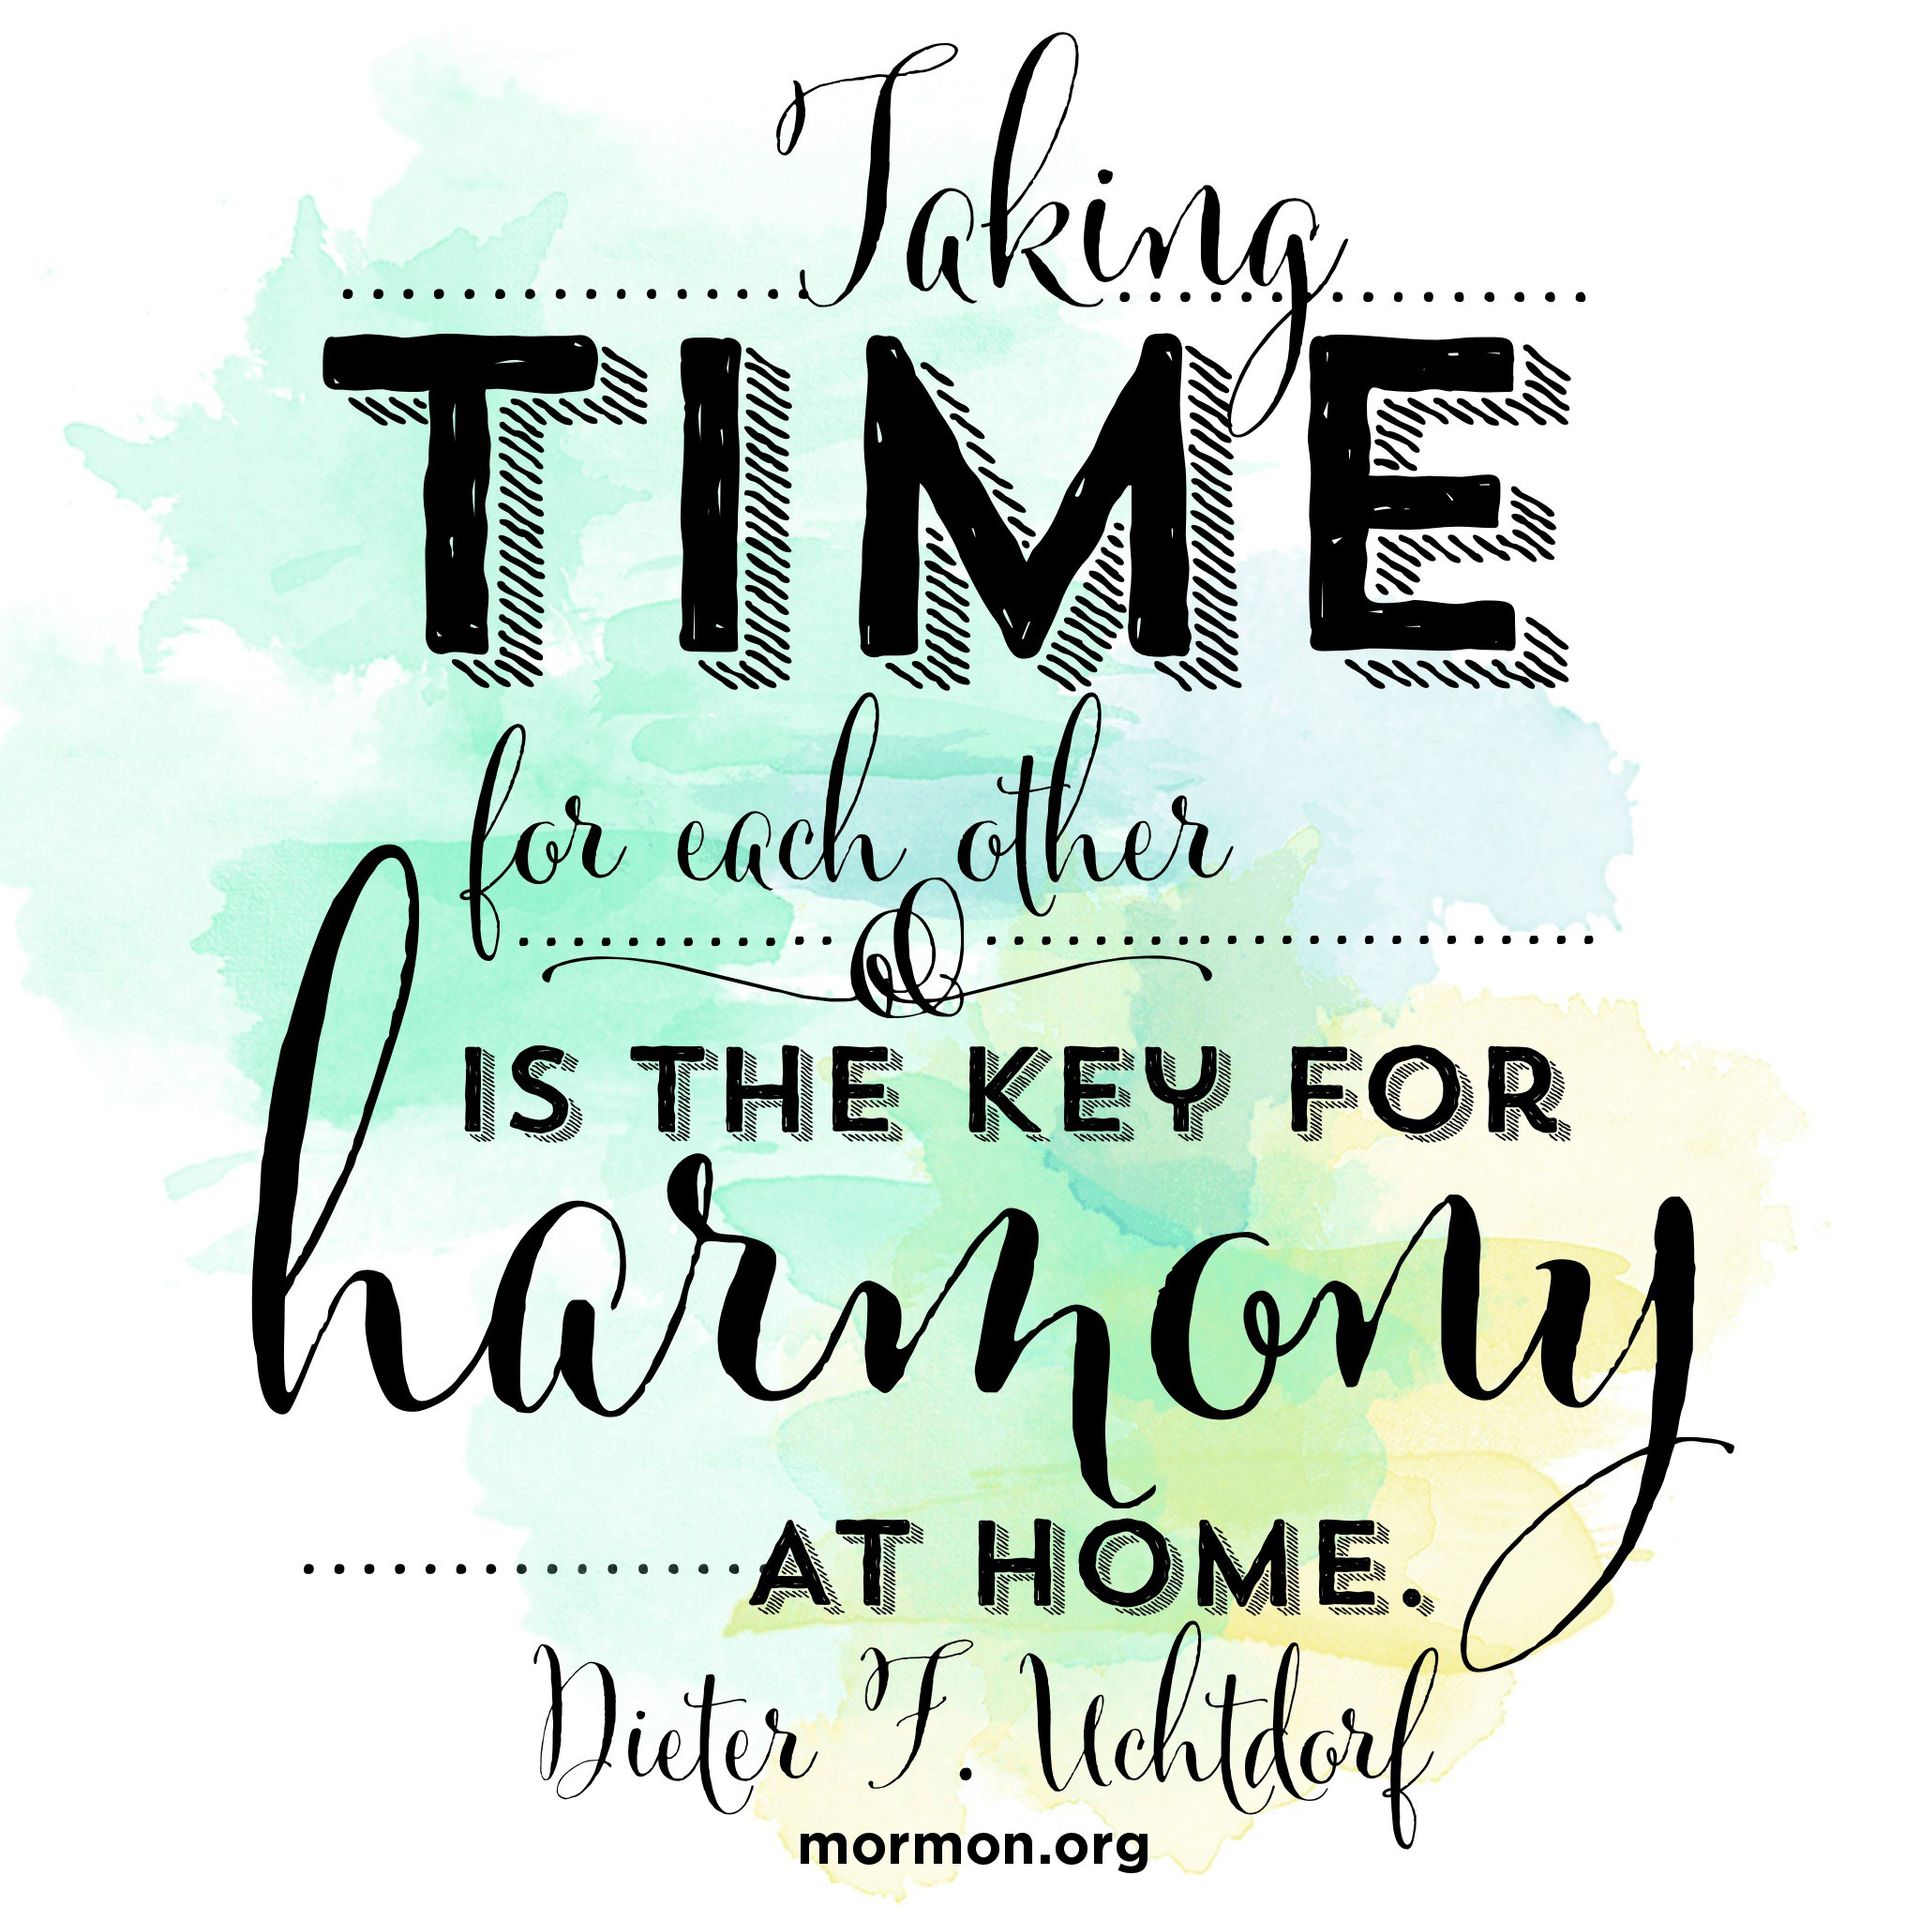 “Taking time for each other is the key for harmony at home.”—President Dieter F. Uchtdorf, “Of Things That Matter Most”